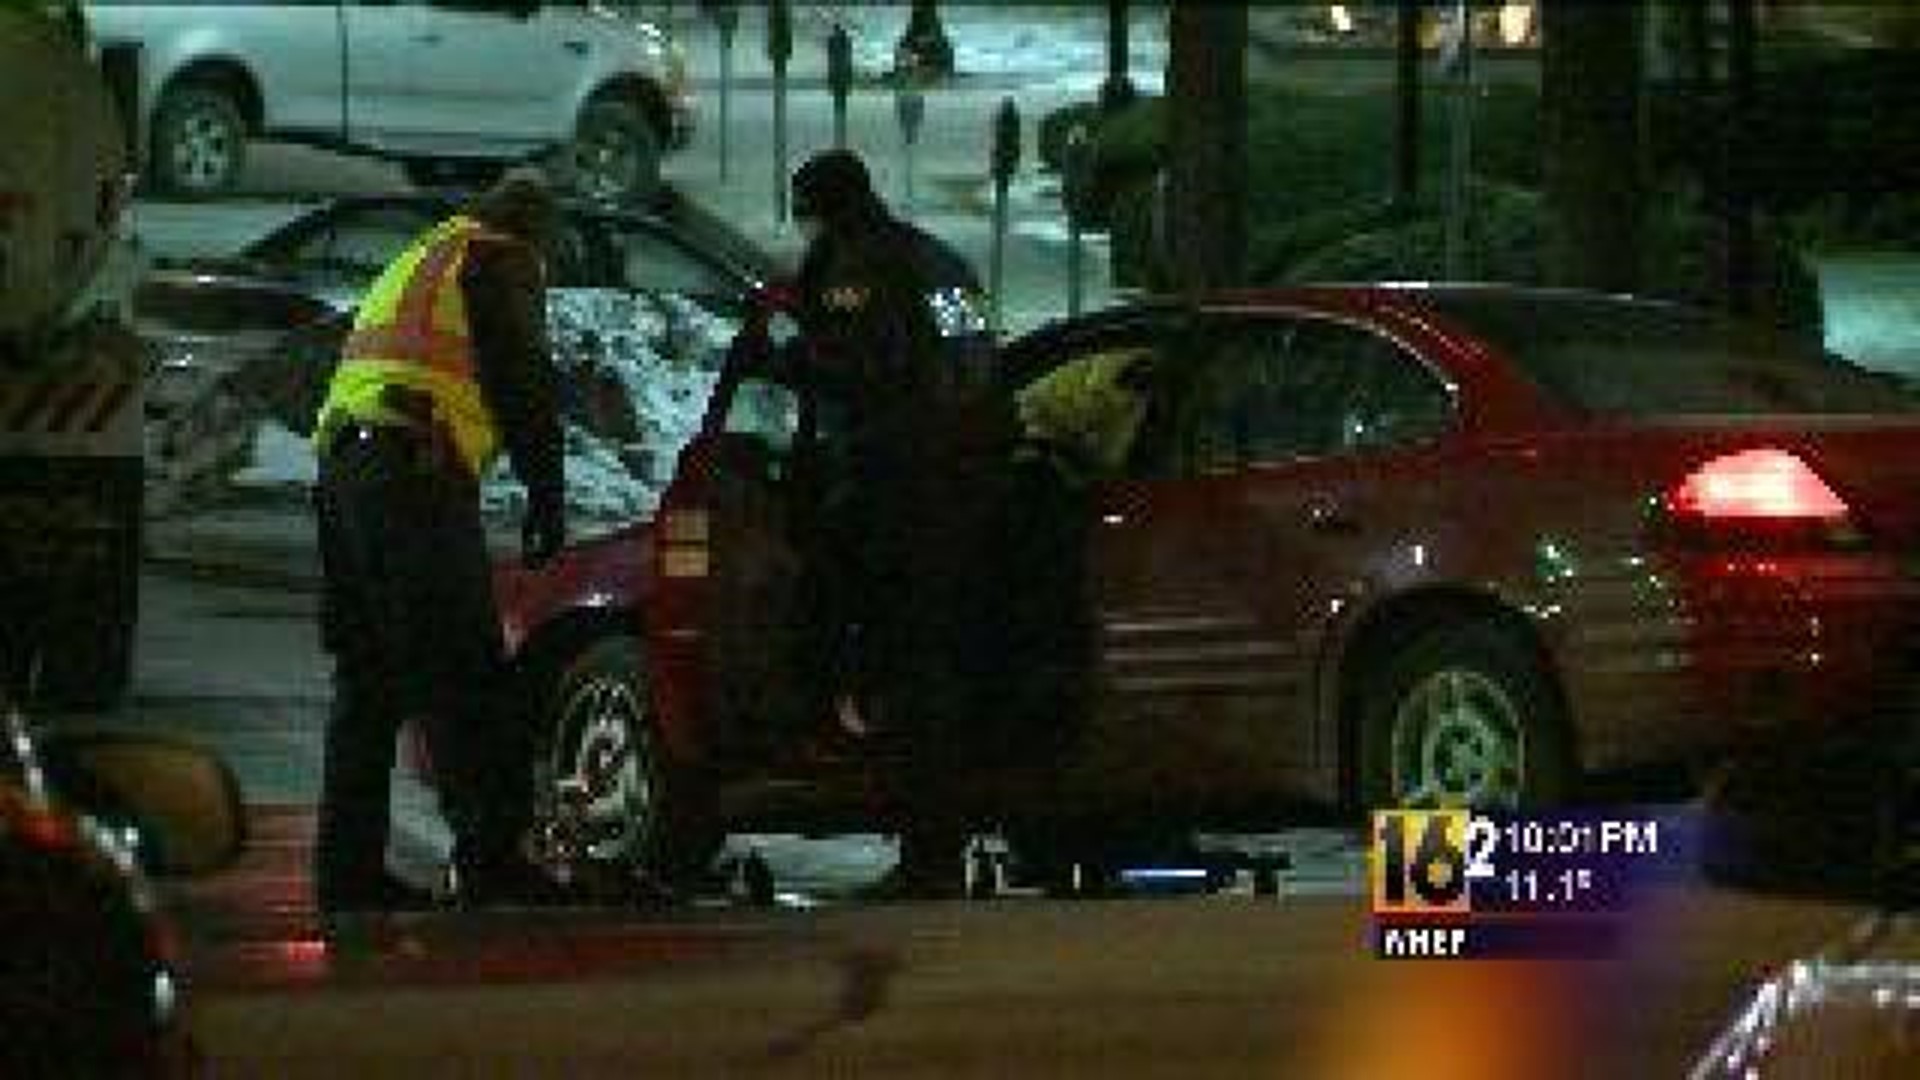 Car Suspected in Fatal Hit-and-Run Used for Reconstruction